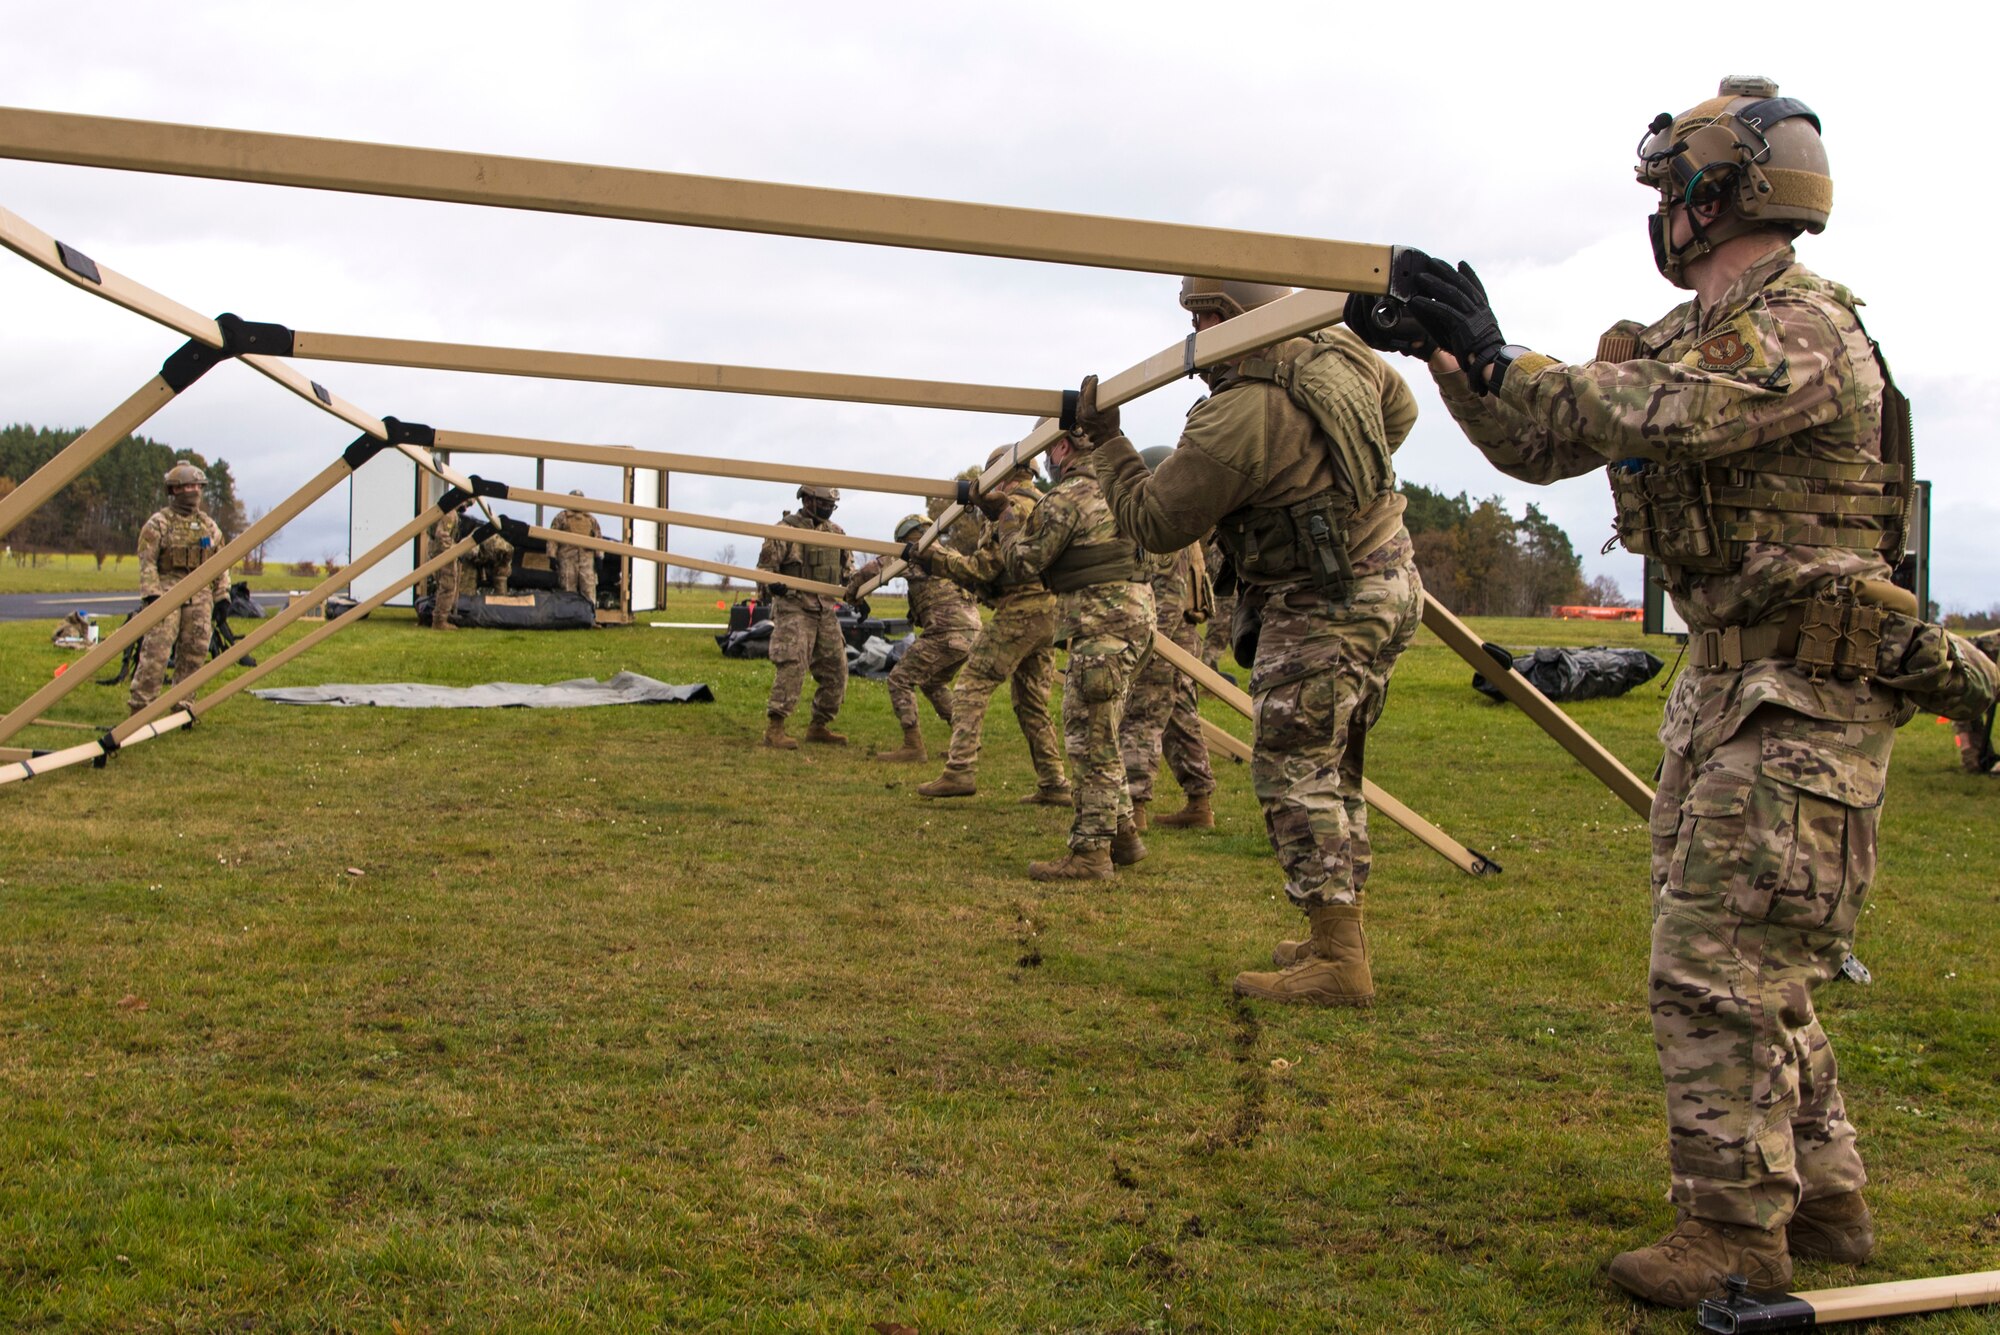 U.S. Airmen assigned to the 435th Contingency Response Group assemble a tent for a life support area during exercise Agile Wolf 21-01